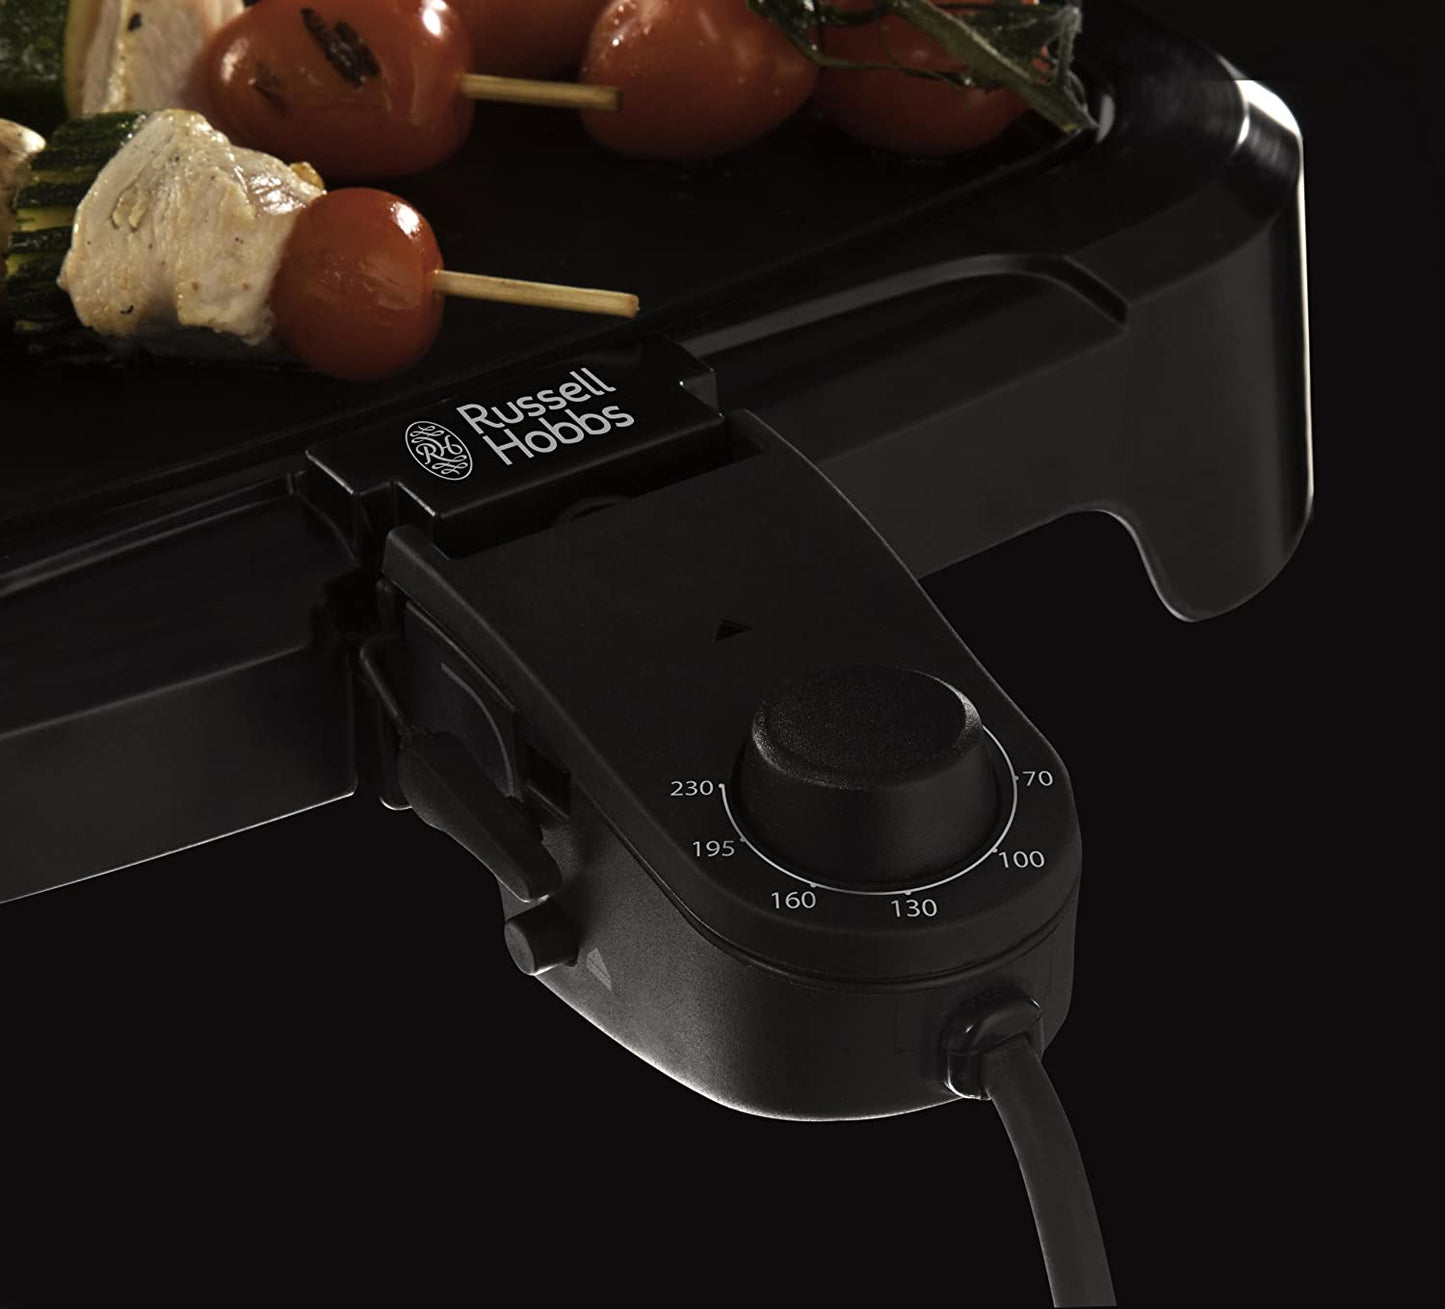 Russell Hobbs 19800 Classics Griddle 1500W Black